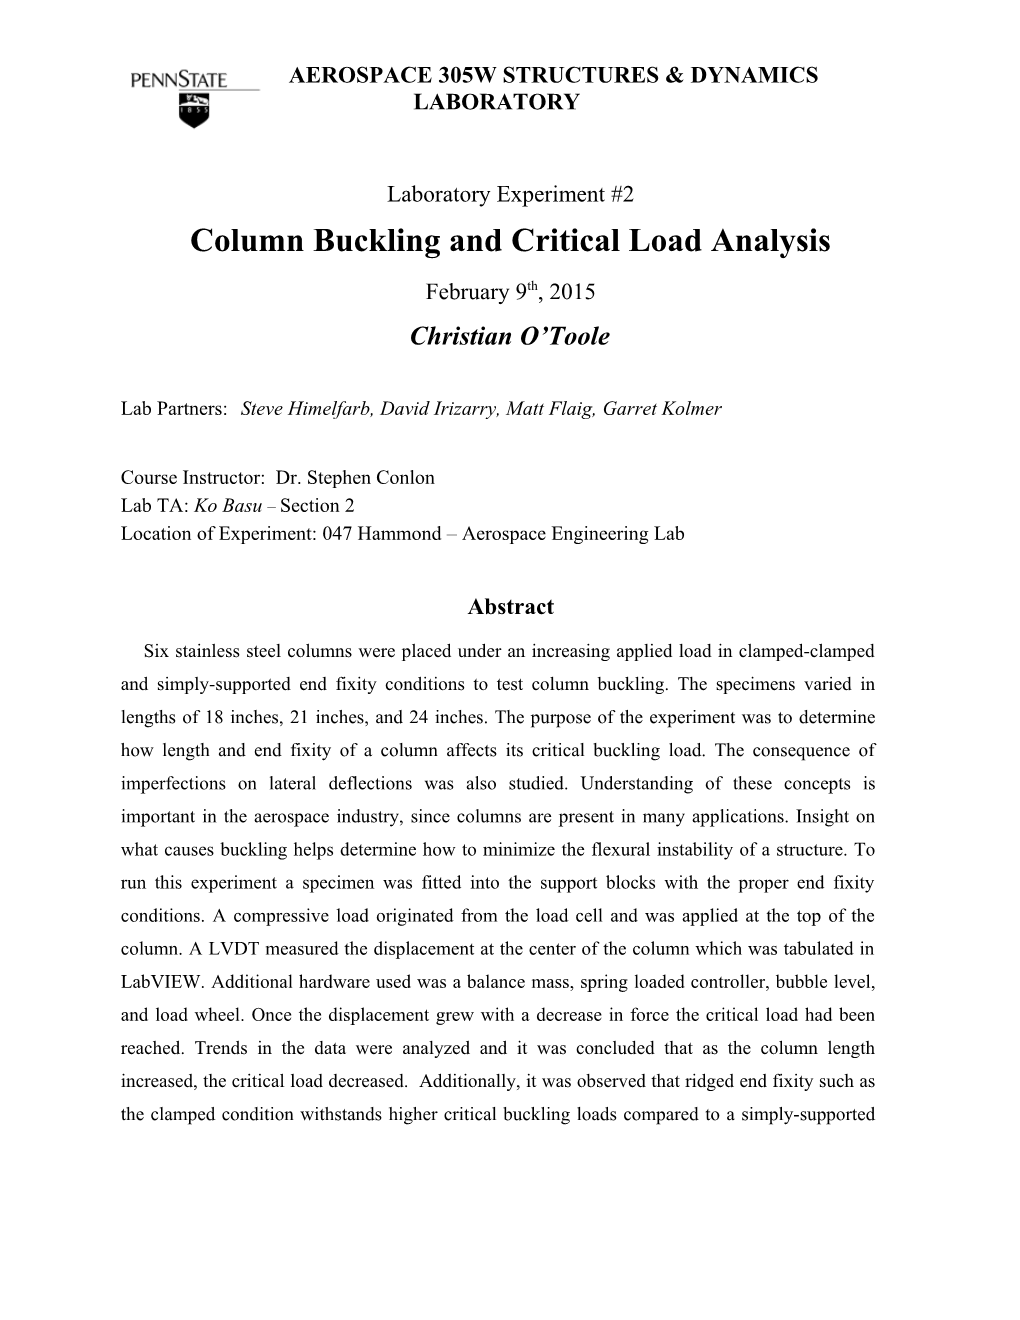 Column Buckling and Critical Load Analysis